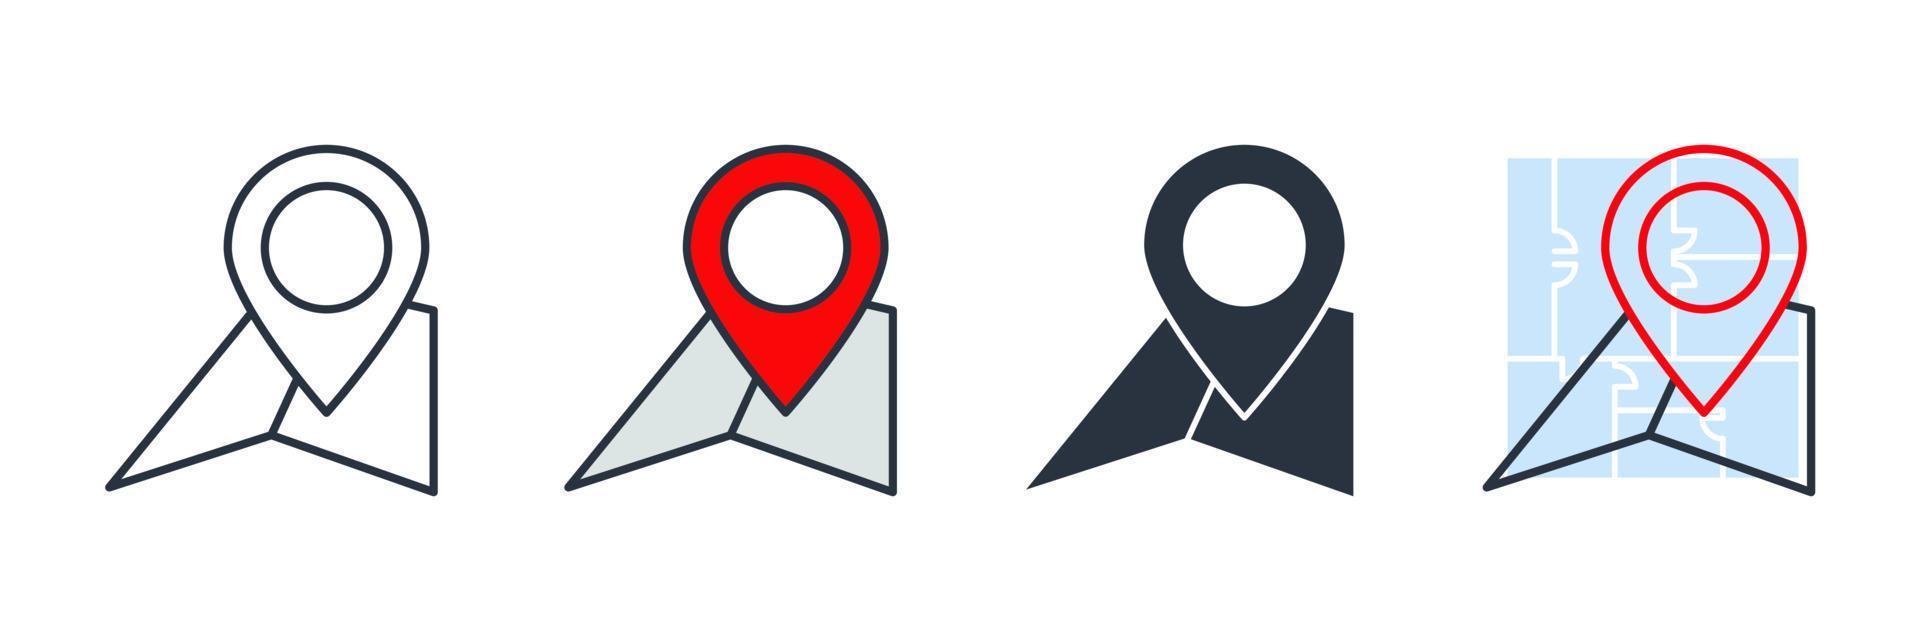 location icon logo vector illustration. map and pin point symbol template for graphic and web design collection